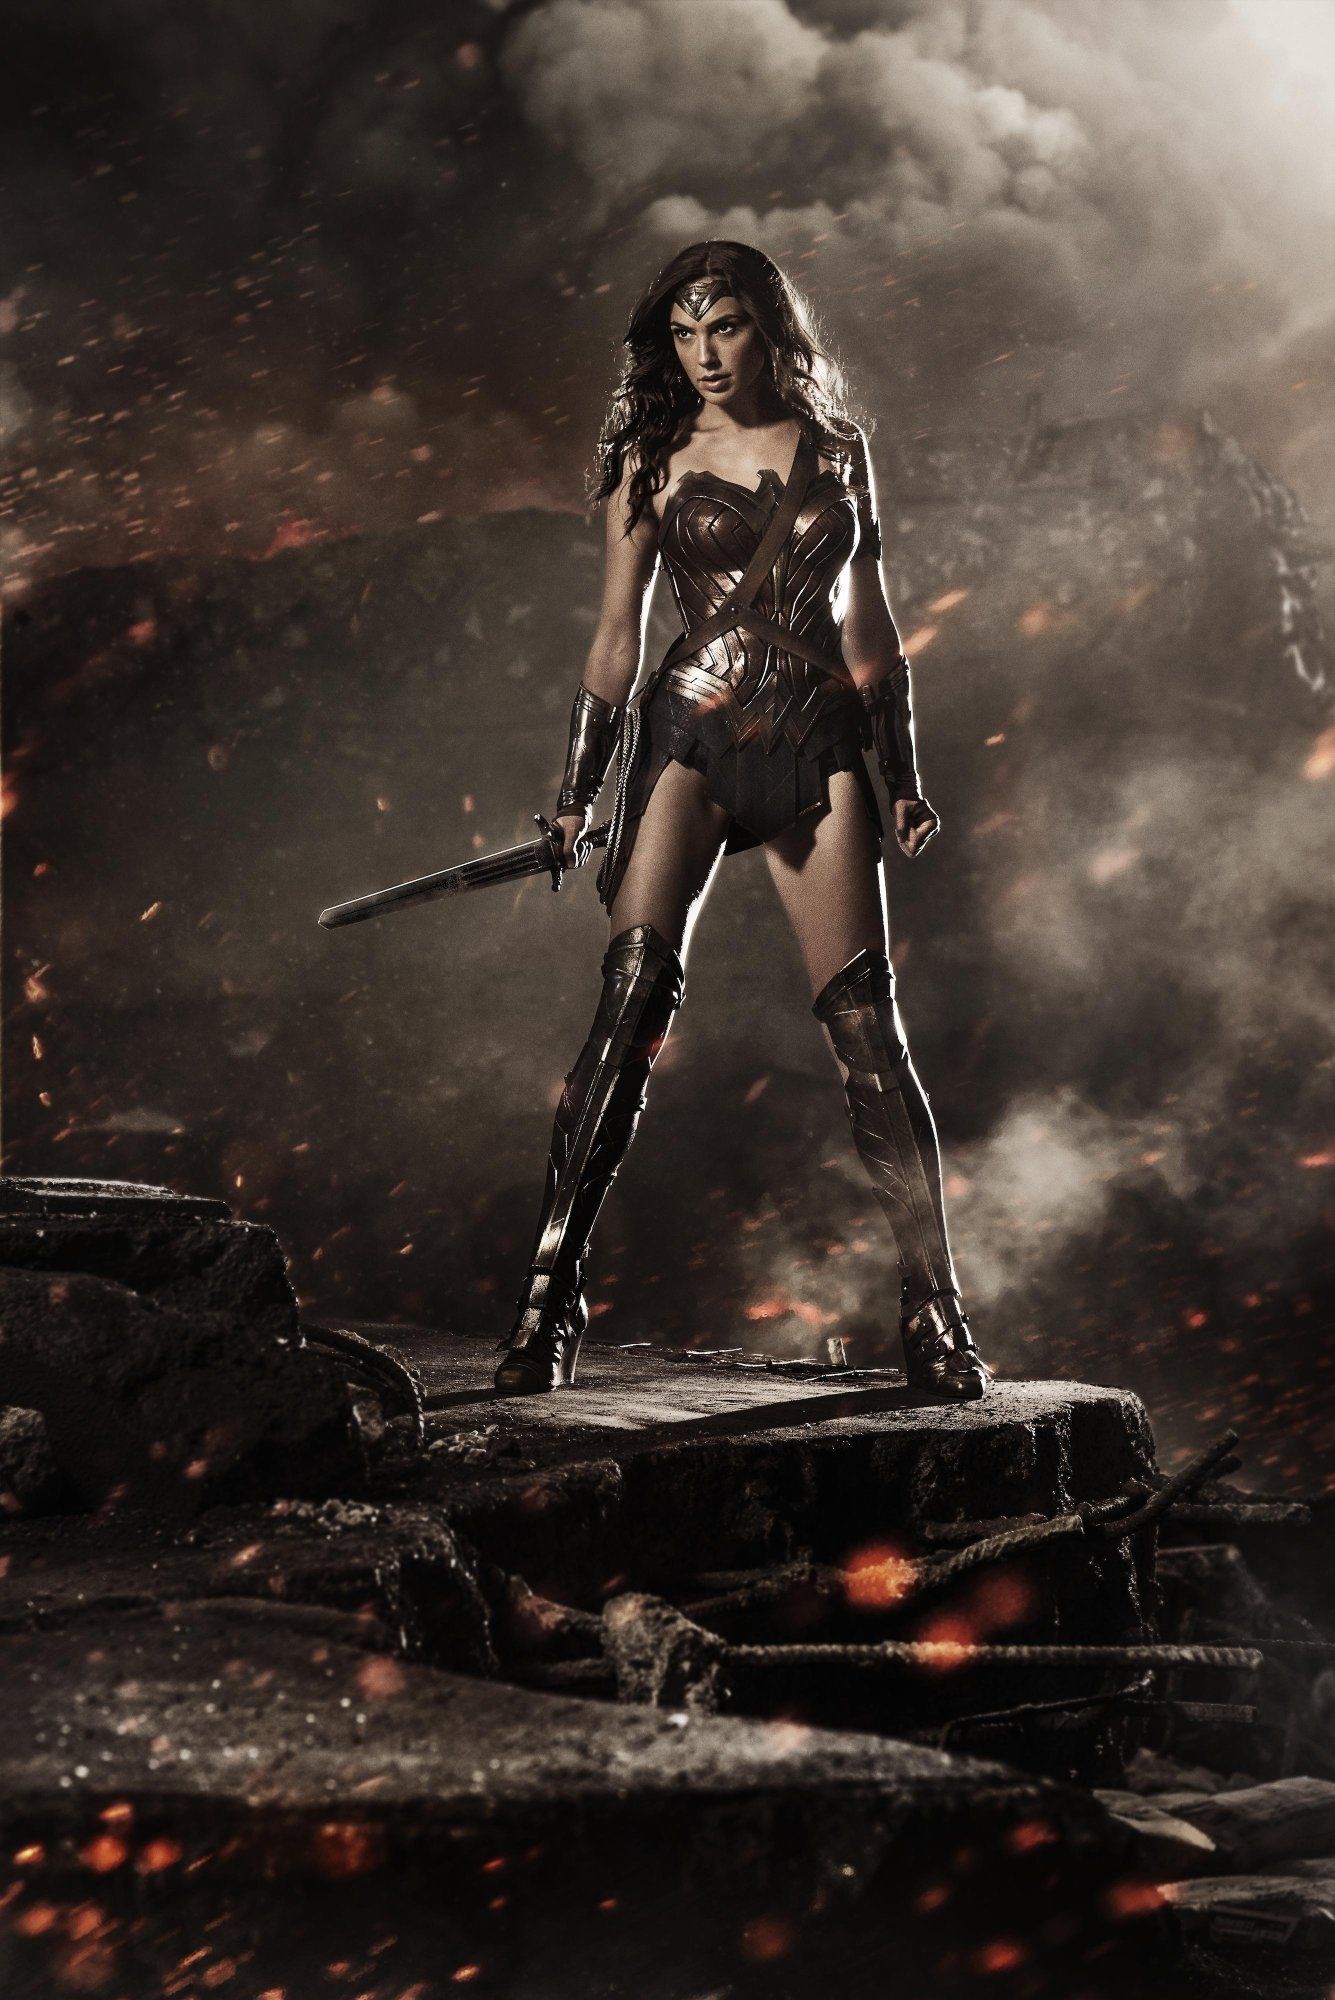 First look at Wonder Women from the upcoming Batman v. Superman: Dawn of Justice that will be directed by Zack Snyder